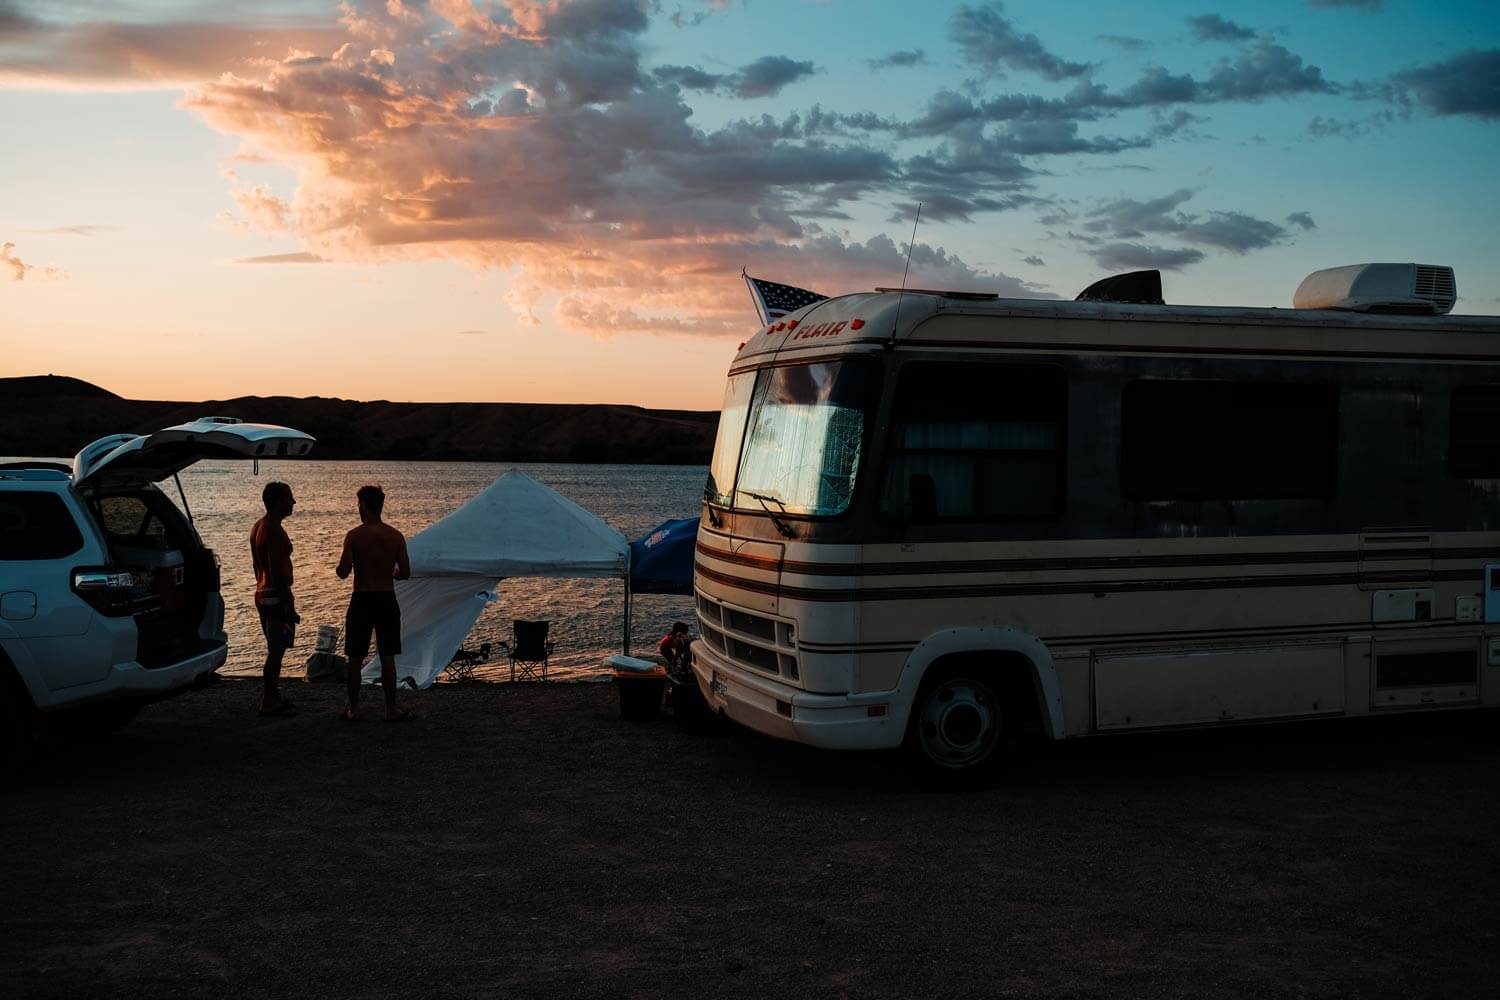 Motorhome parked by a lake at dusk